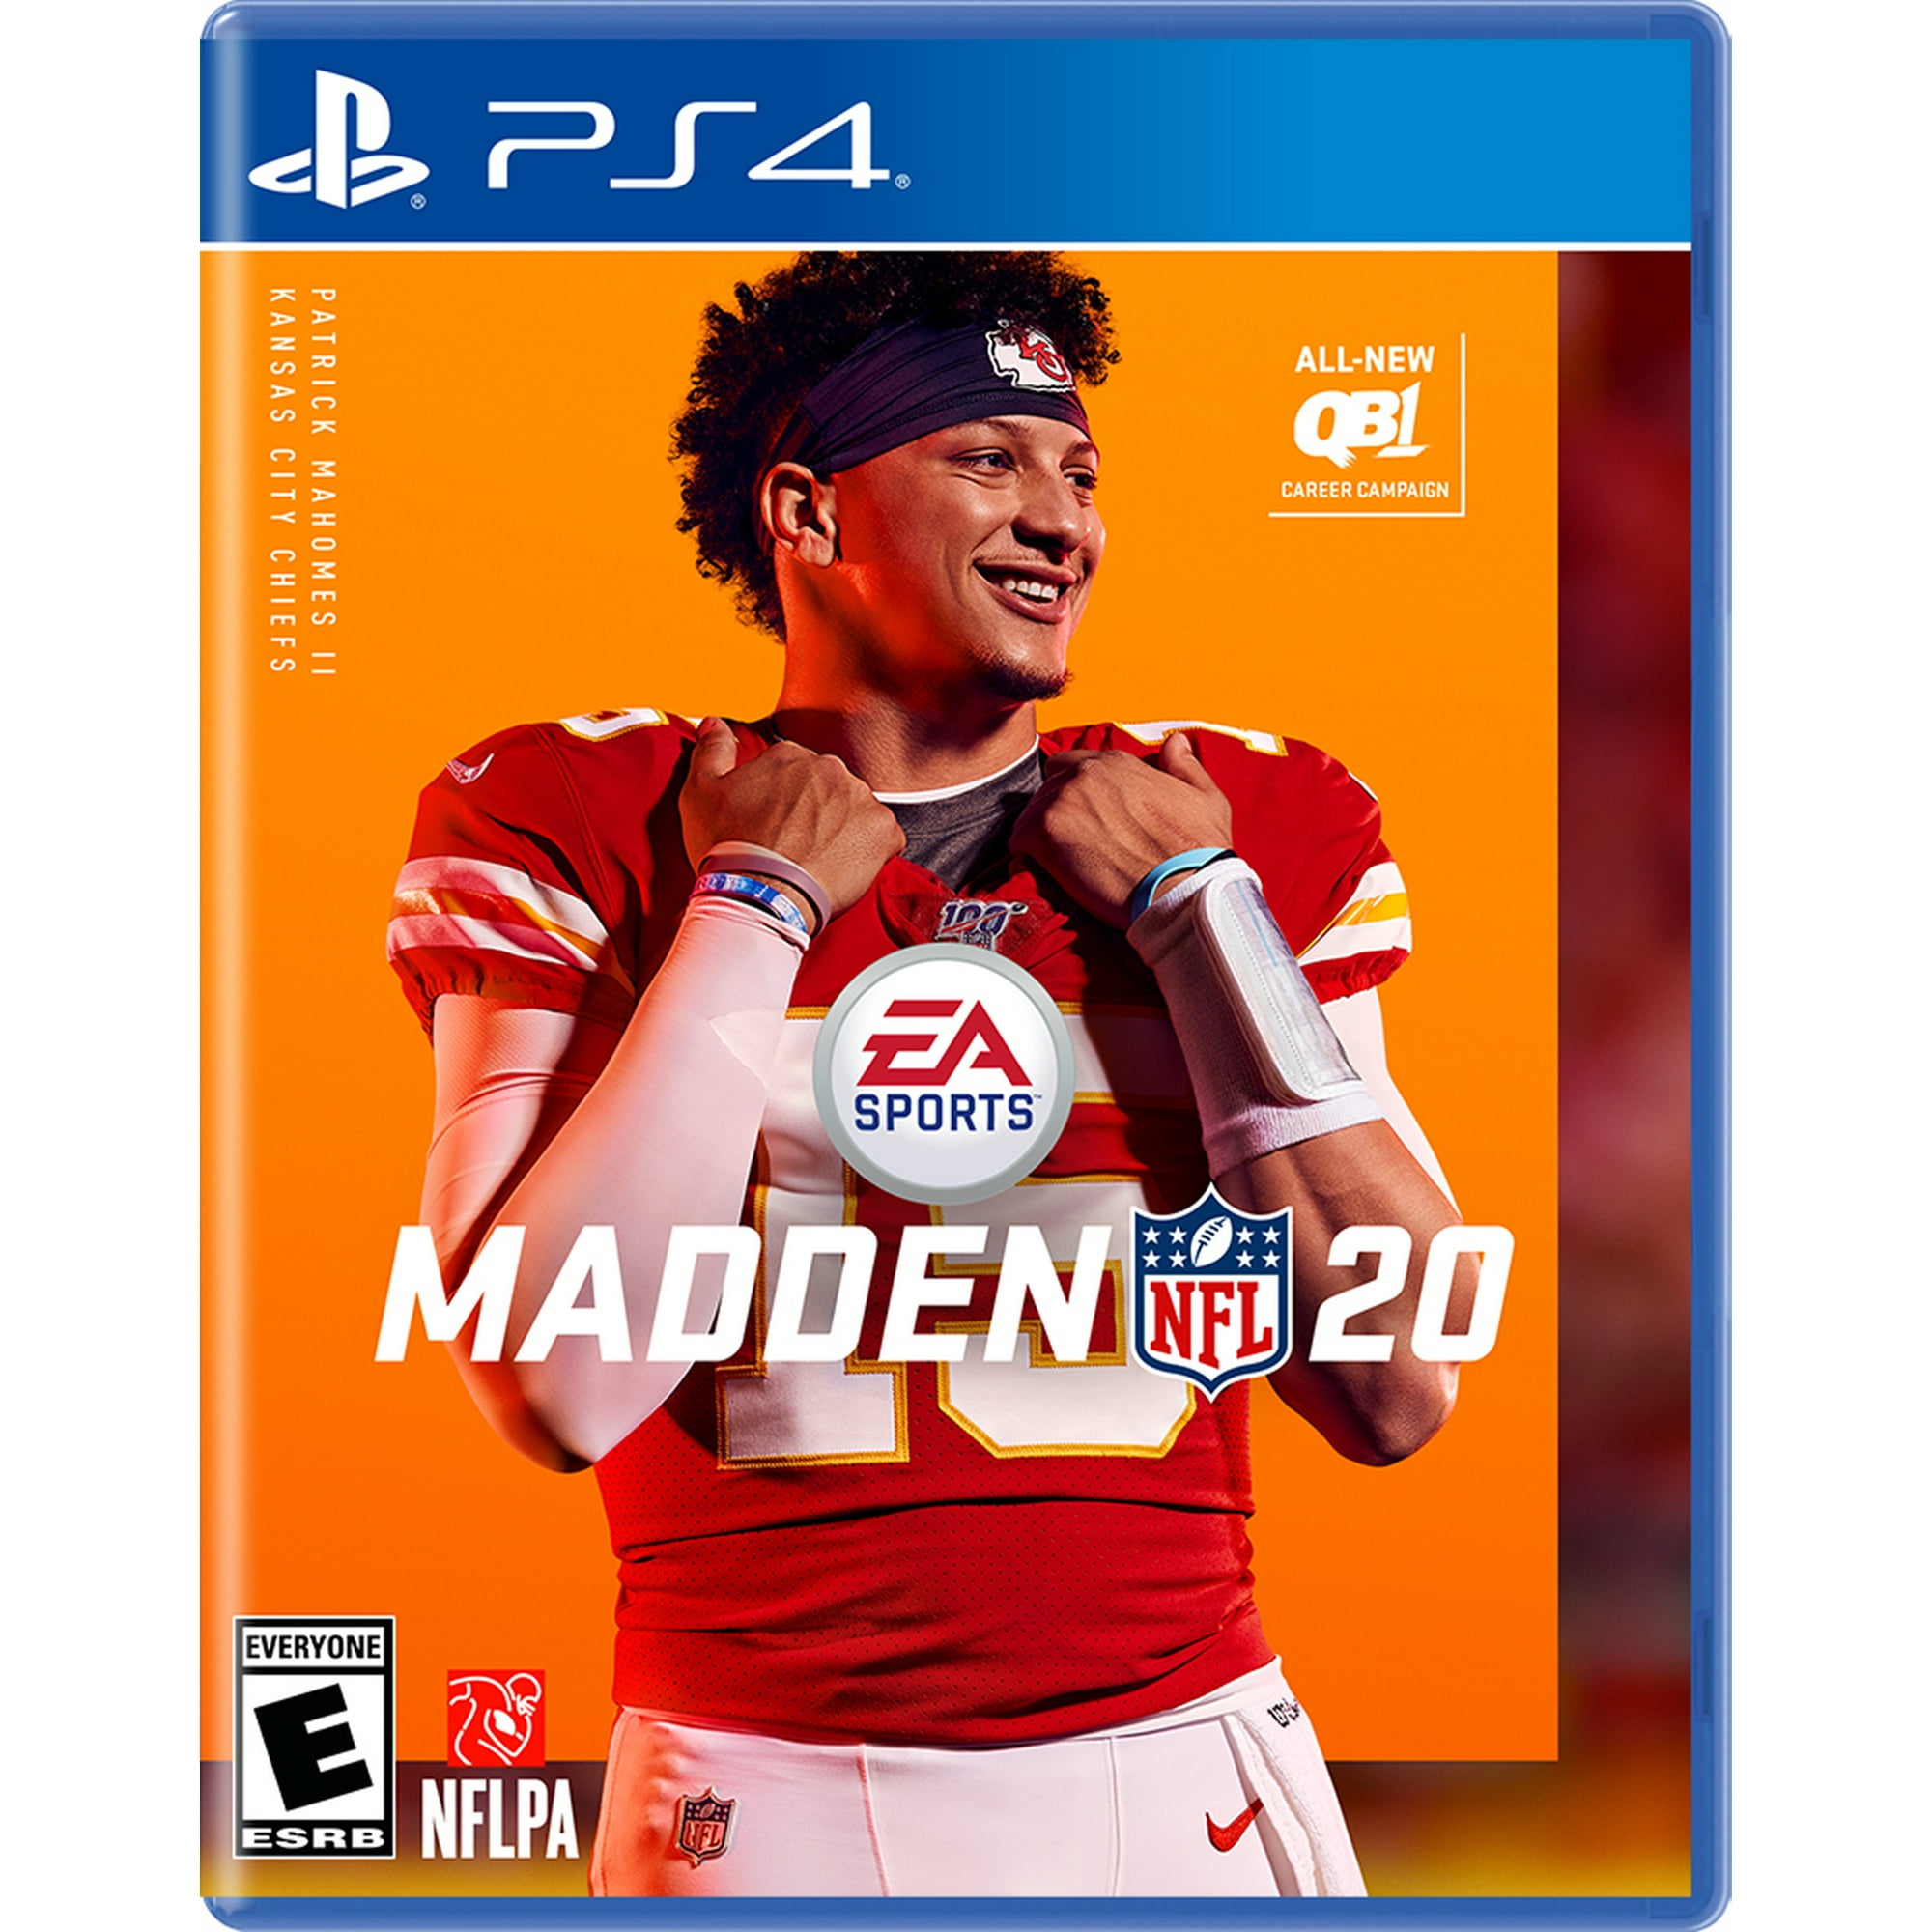 Madden NFL 20, Electronic Arts, PlayStation 4, [Physical], 014633738377 